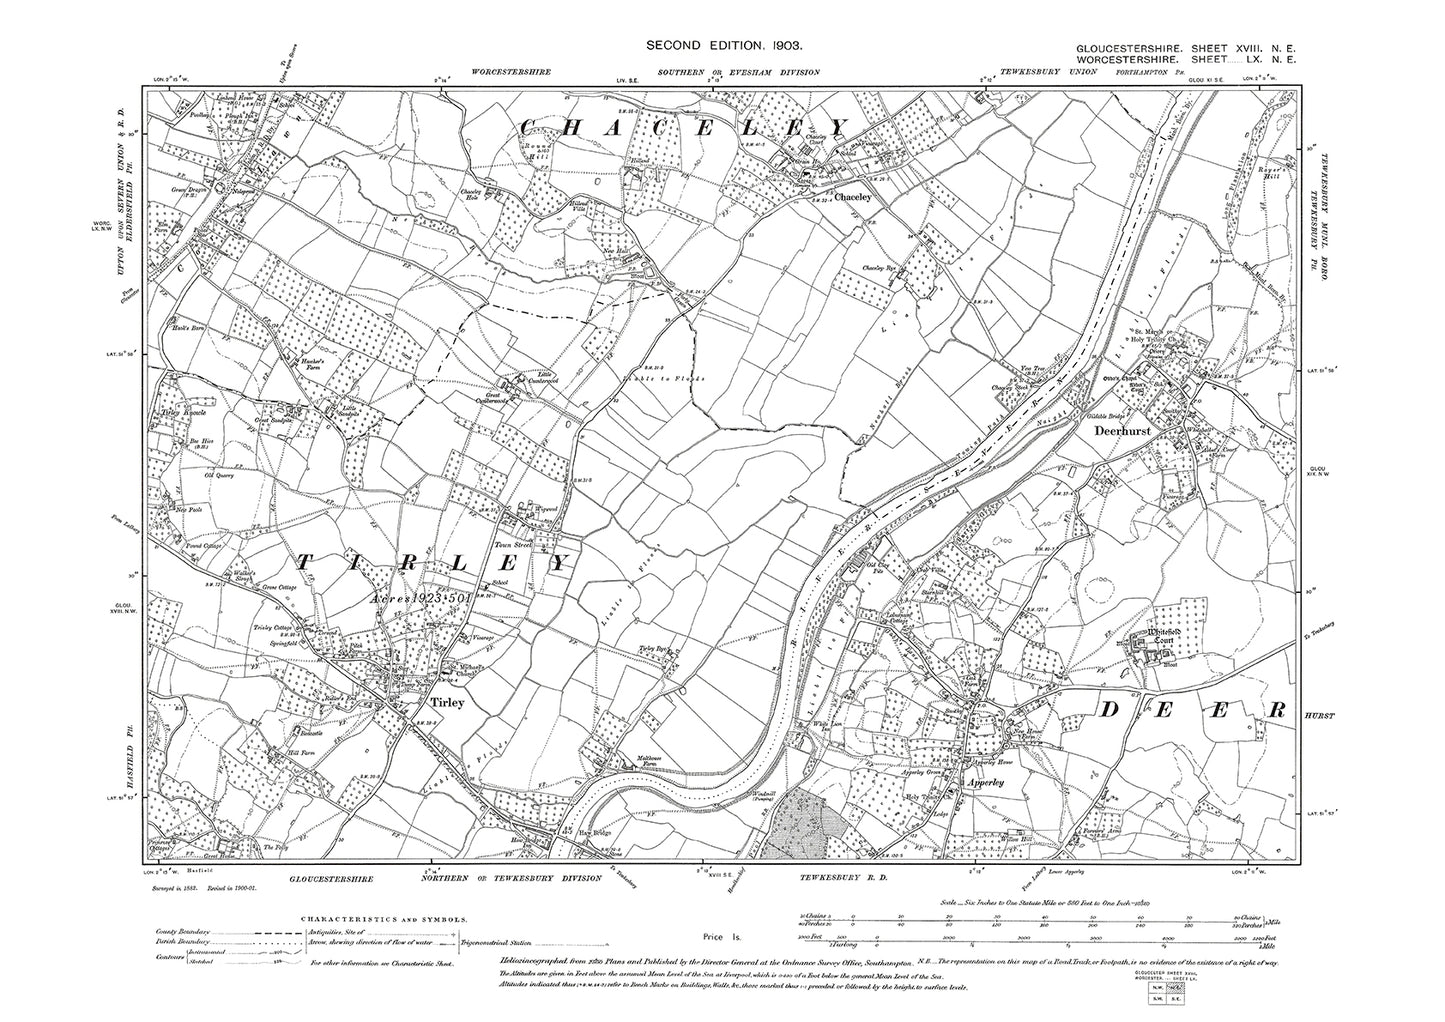 Old OS map dated 1903, showing Tirley, Deerhurst, Apperley in Gloucestershire - 18NE